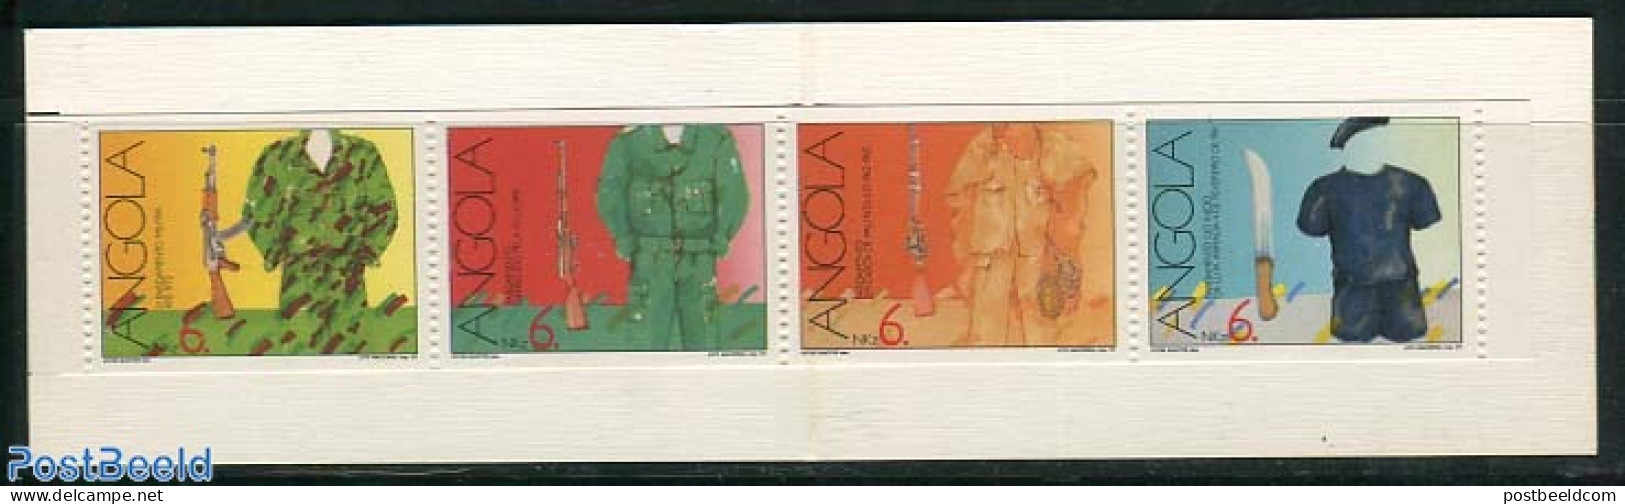 Angola 1991 Uniforms Booklet, Mint NH, History - Various - Stamp Booklets - Uniforms - Unclassified